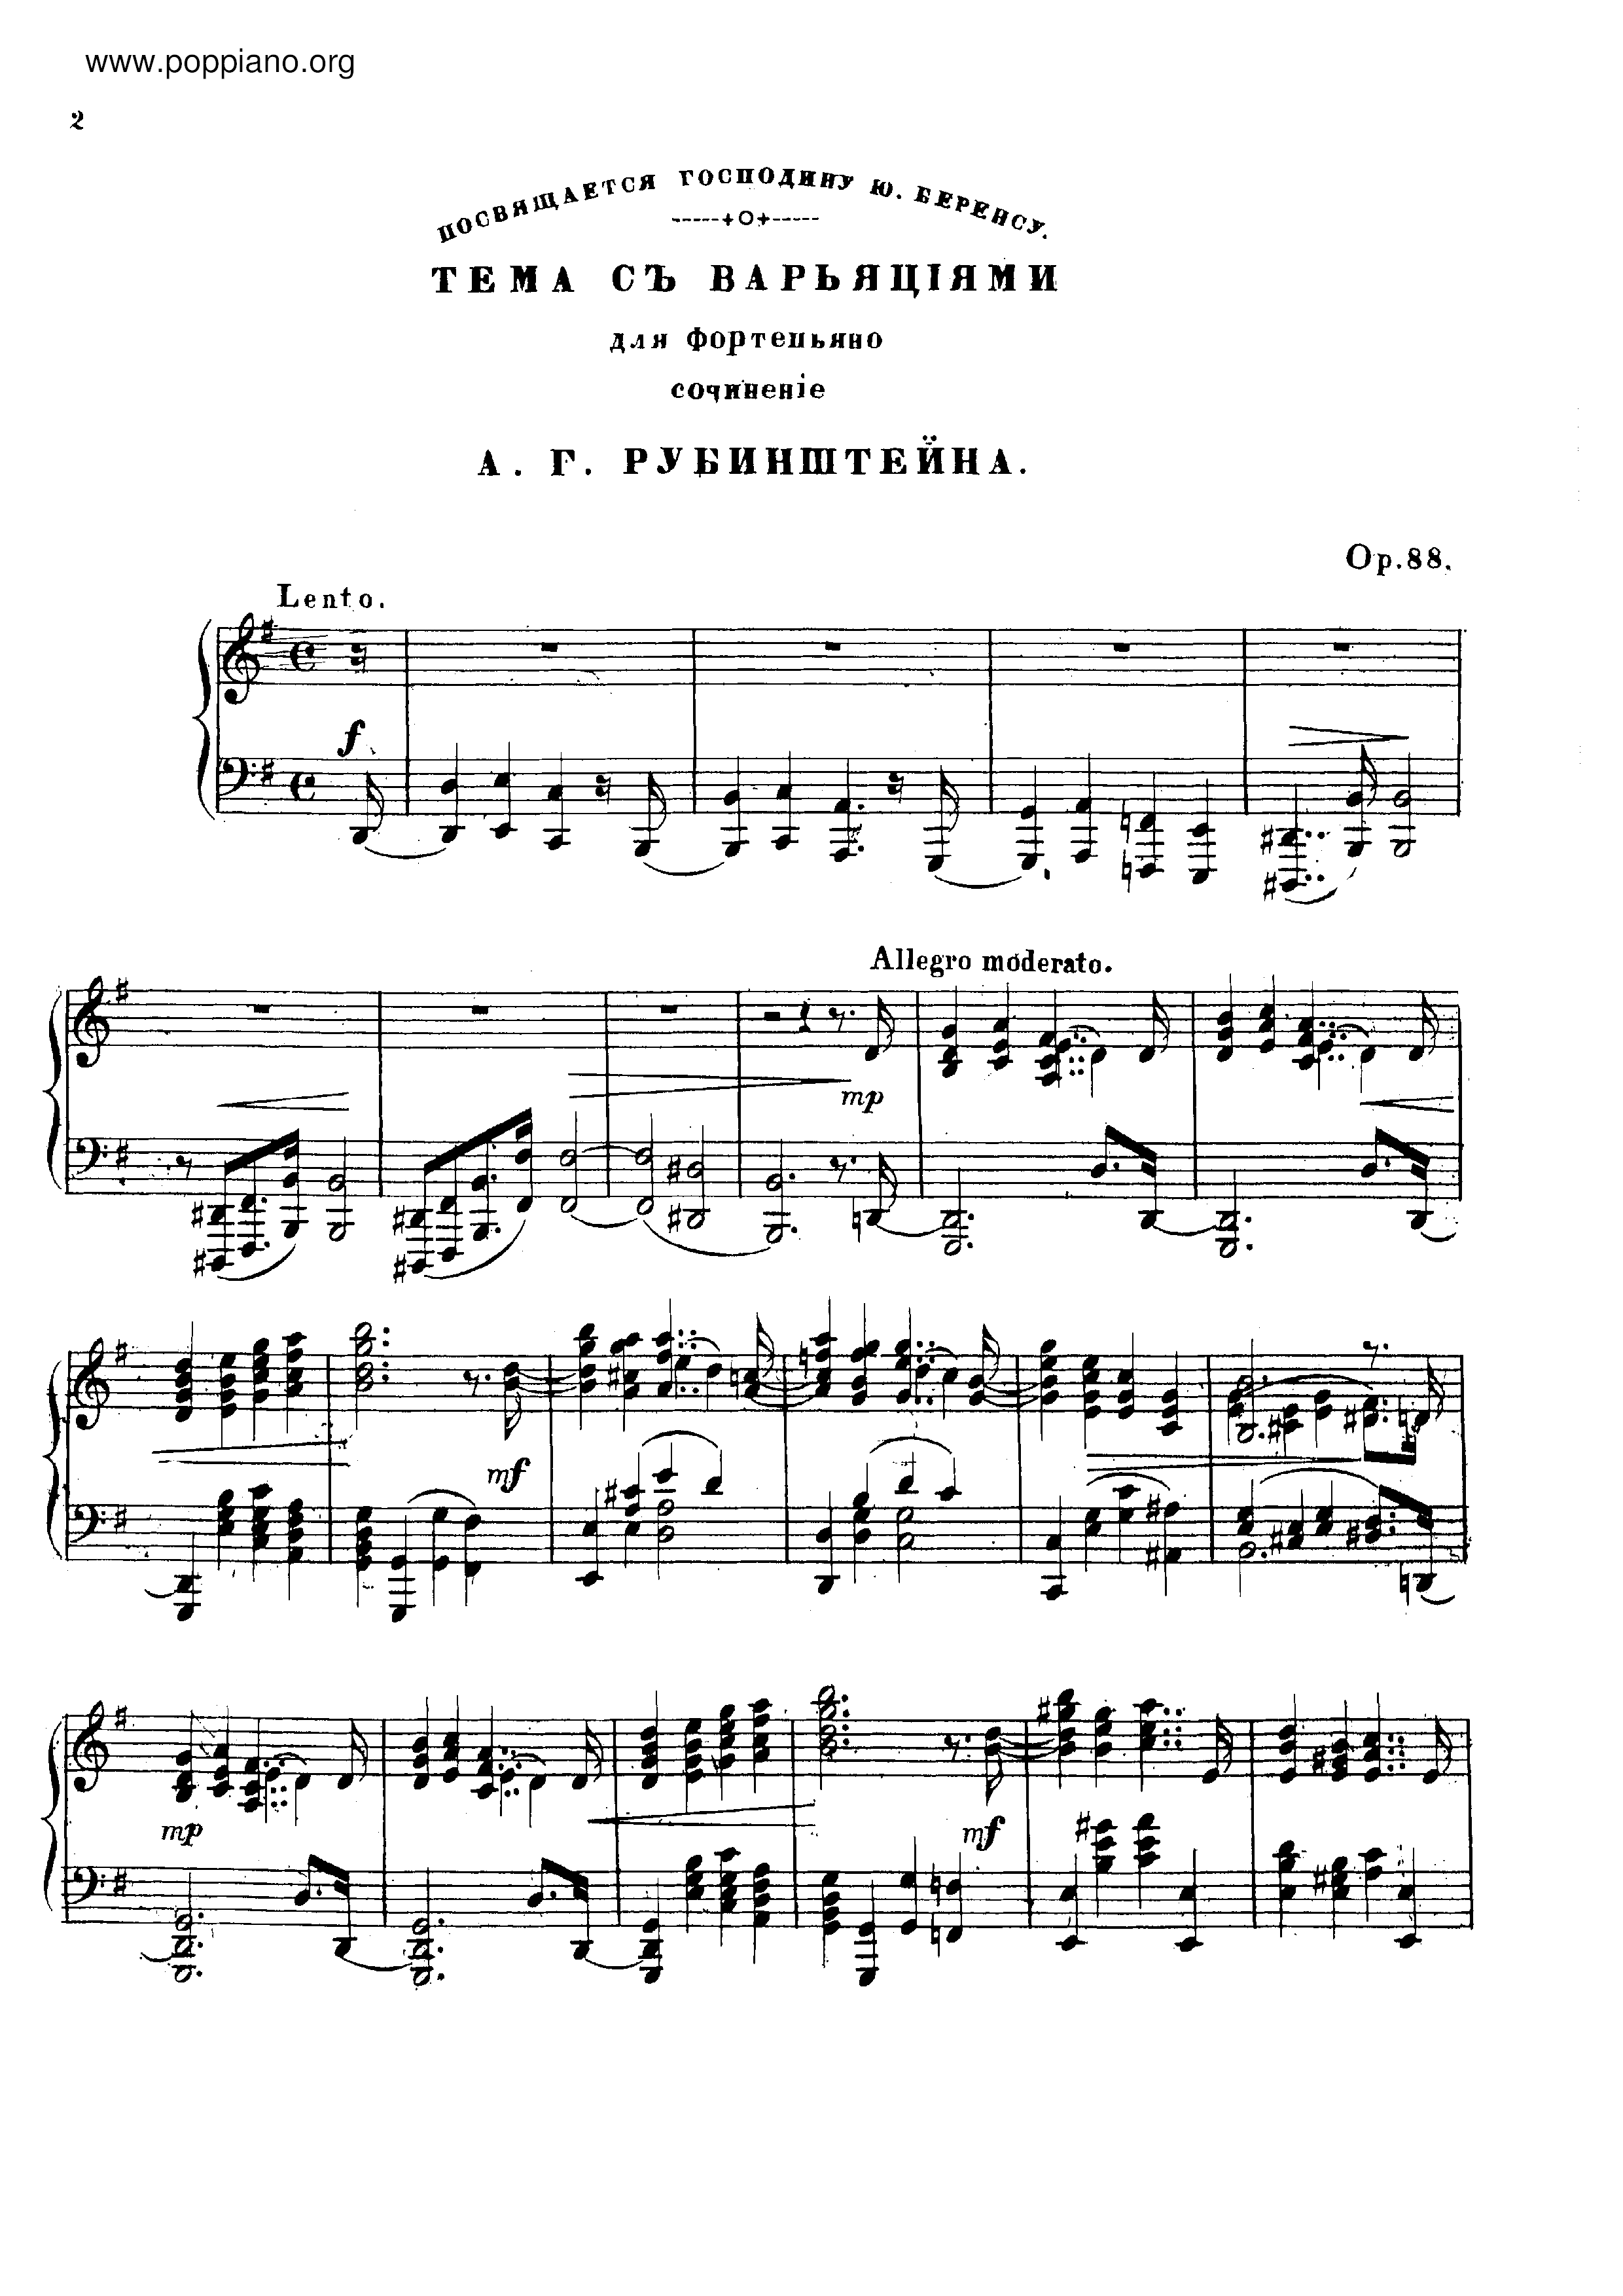 Theme and Variations, Op.88ピアノ譜